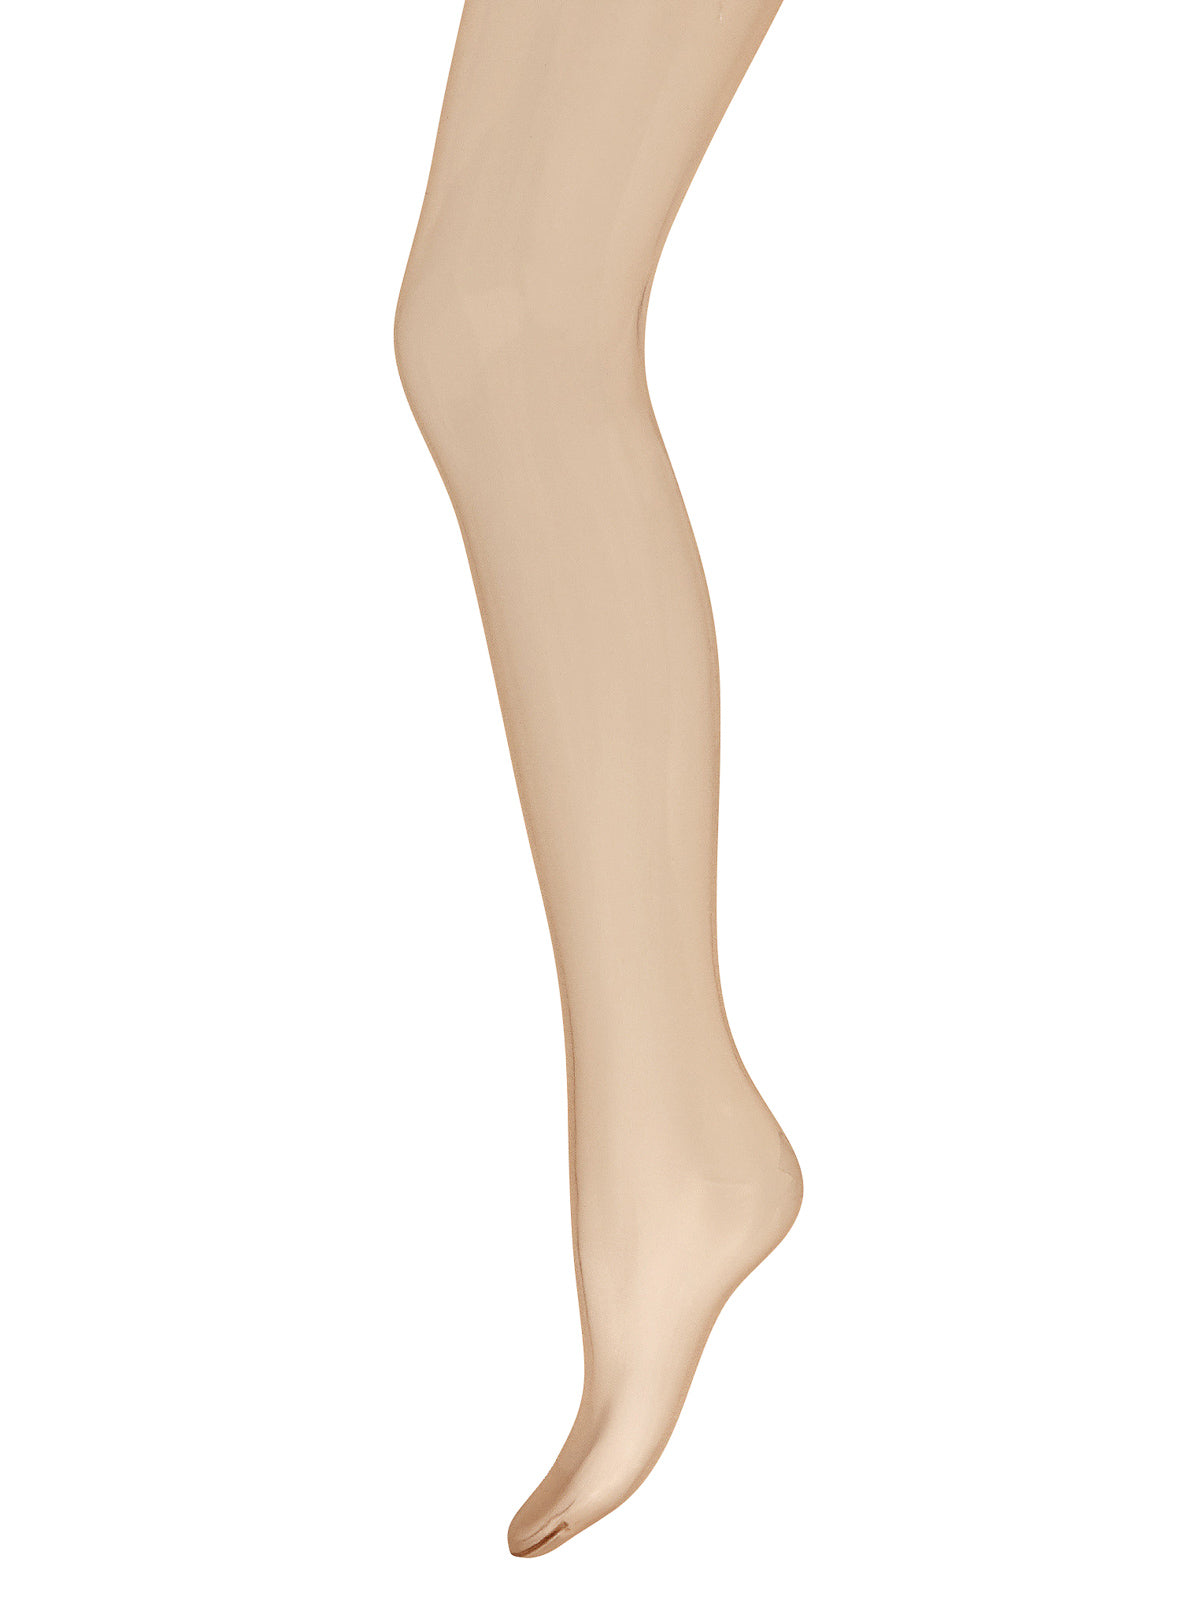 Wolford Sheer Nude Tights